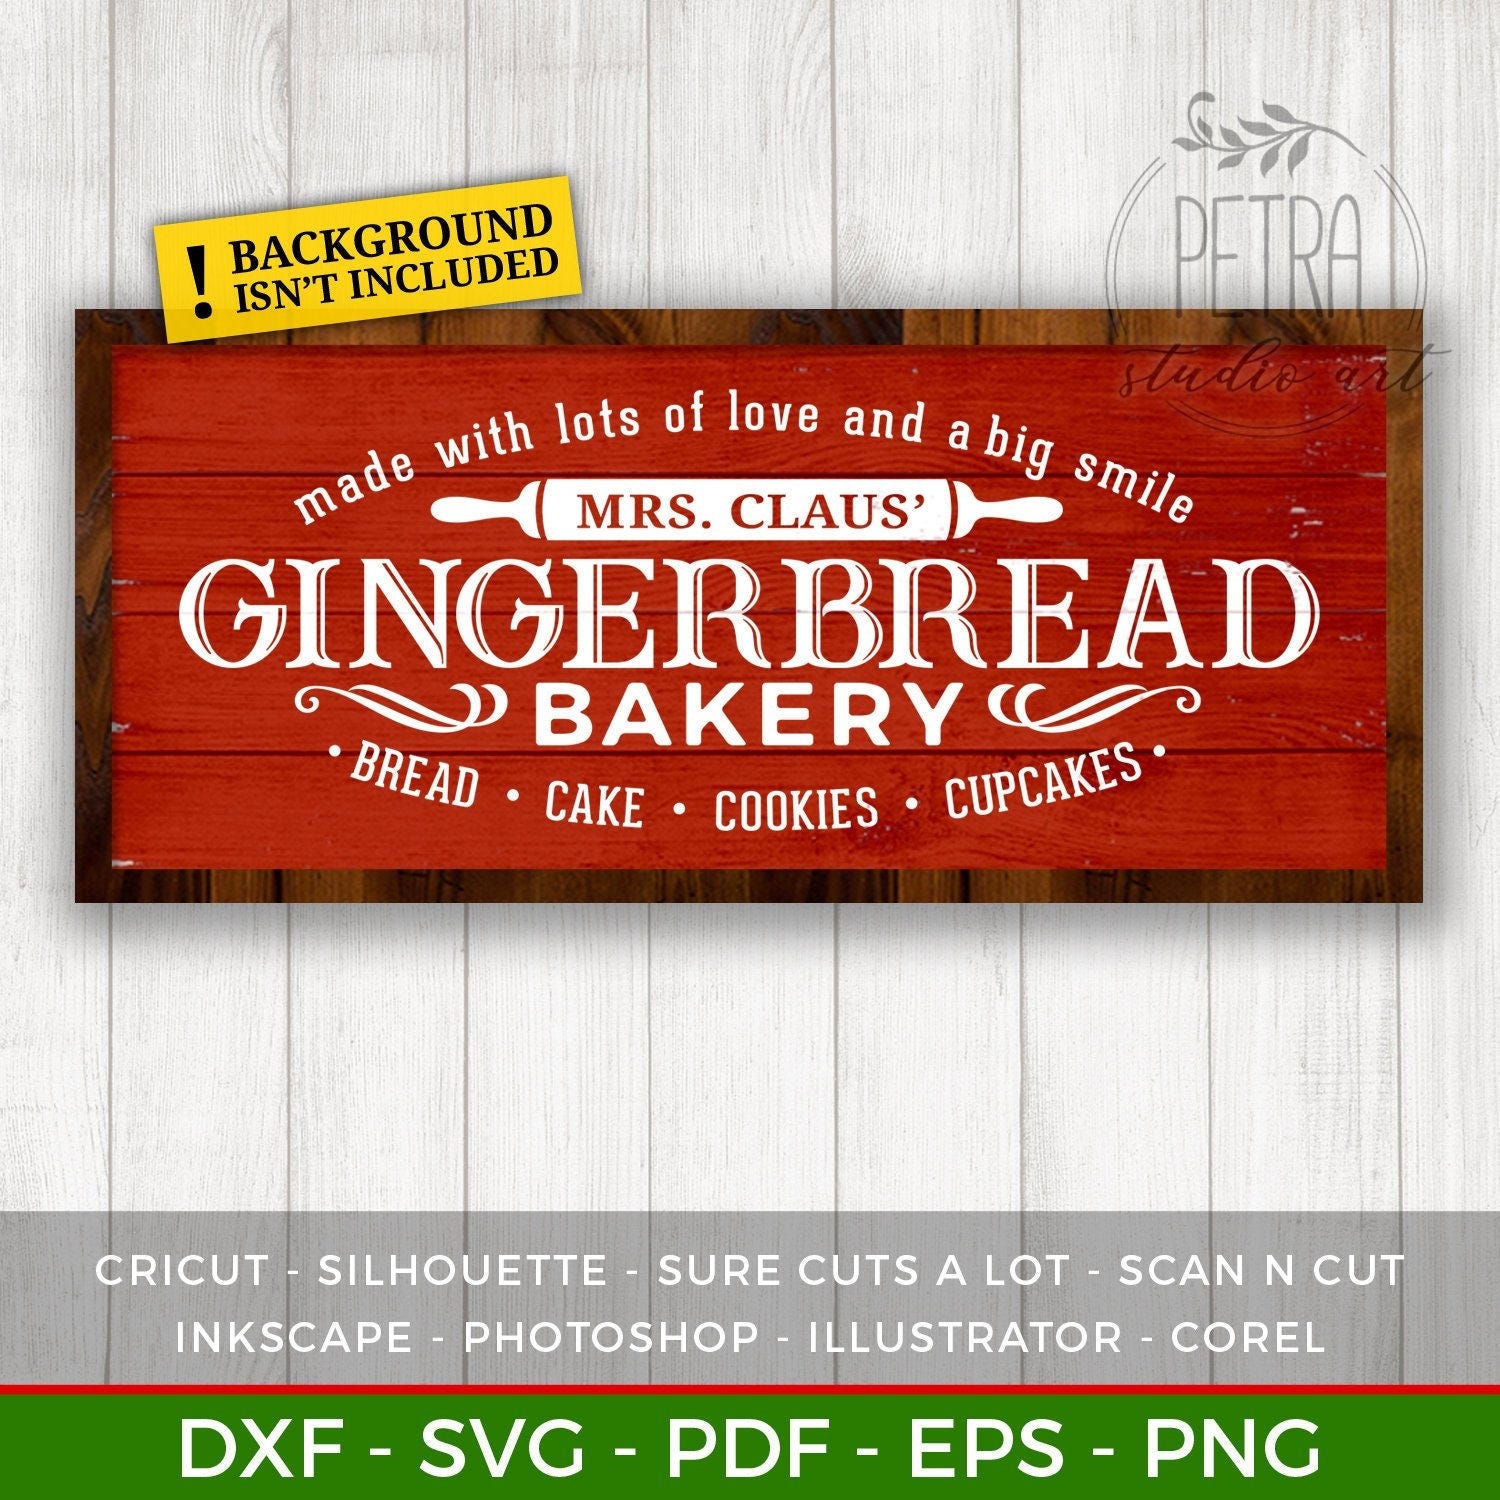 Mrs Claus Gingerbread Bakery SVG Cut File for Rustic Christmas Home Decor and Farmhouse Wall Decoration. Personal and small business use.